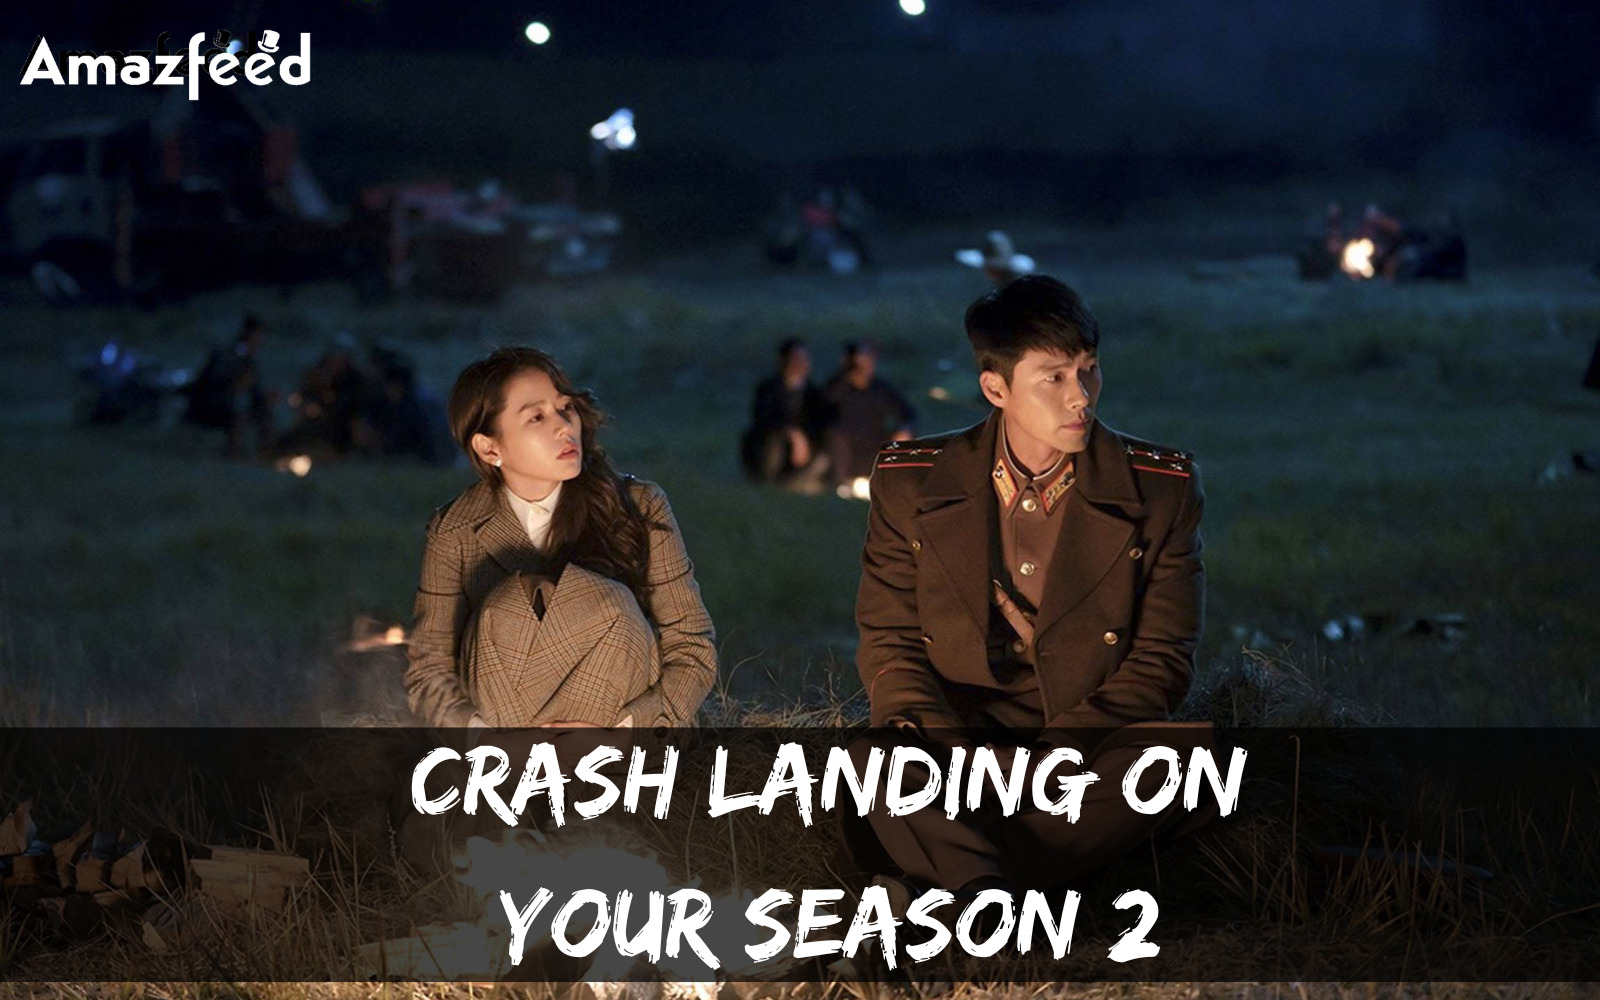 When Is Crash landing on your Season 2 Coming Out